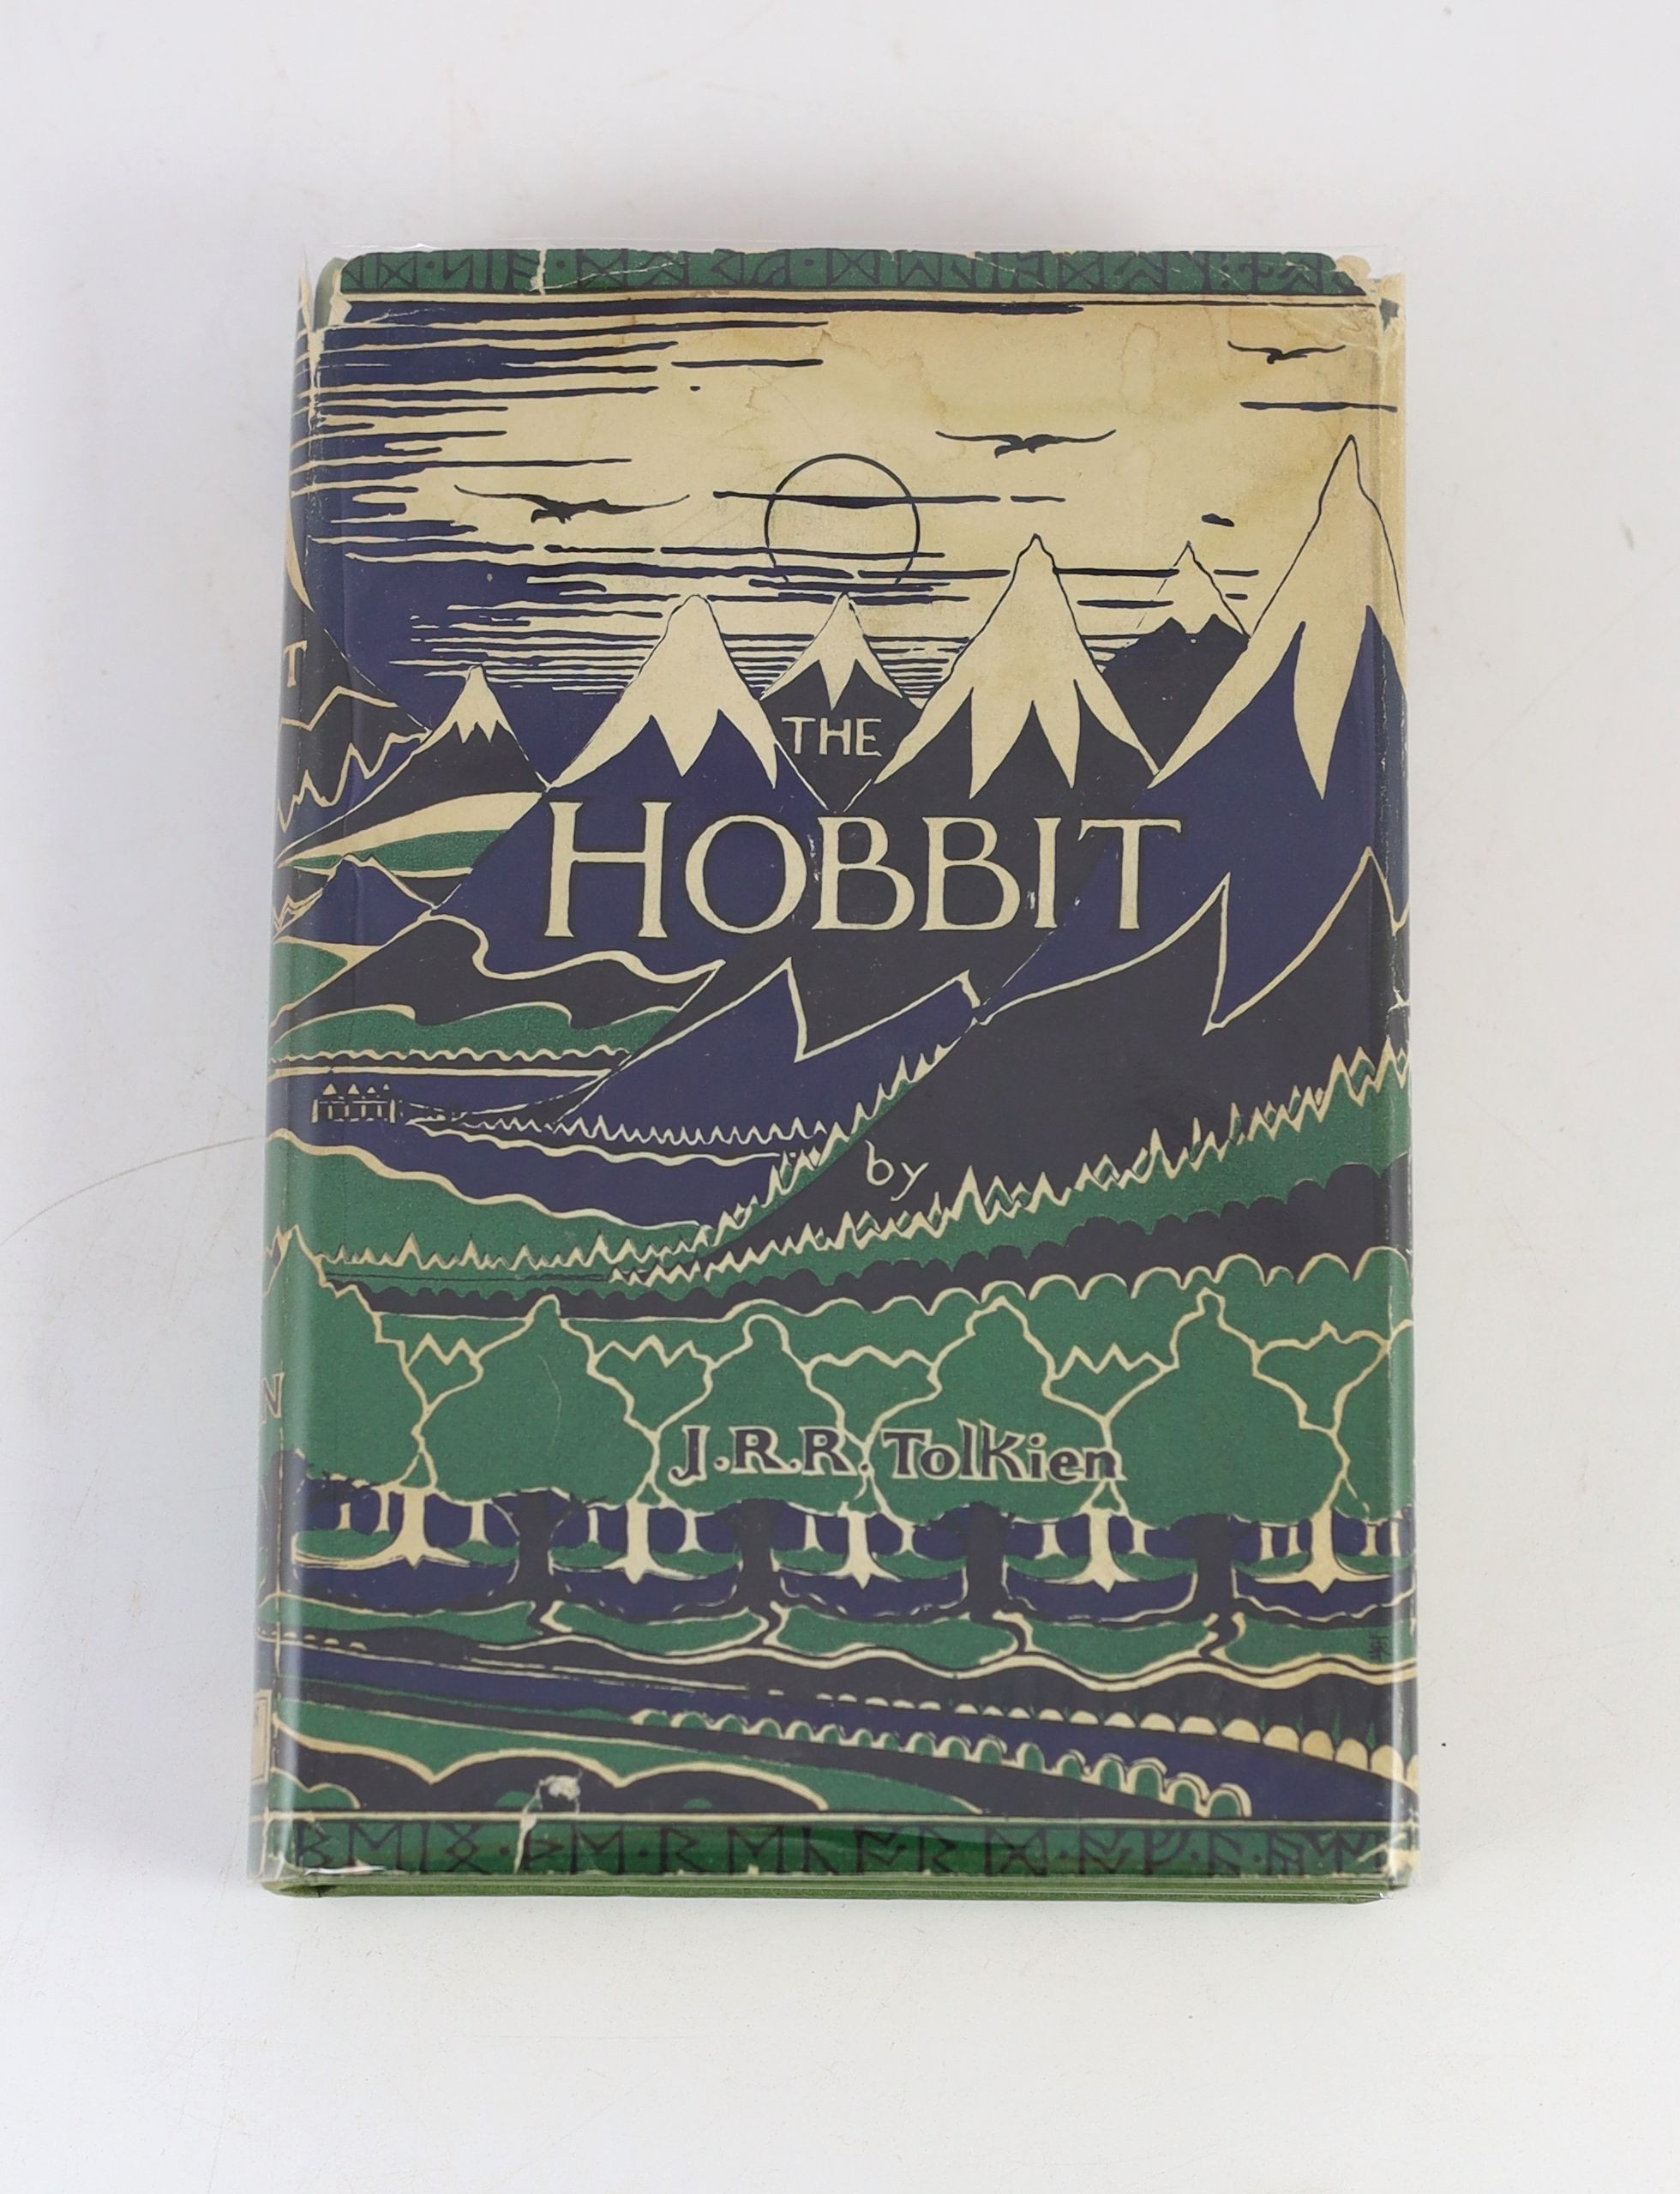 Tolkien, John Ronald Reuel - The Hobbit, 2nd edition, 11th impression, with colour frontispiece, map endpapers, original green cloth in unclipped d/j, with small loss to spine head and foot and a few edge tears, ownershi